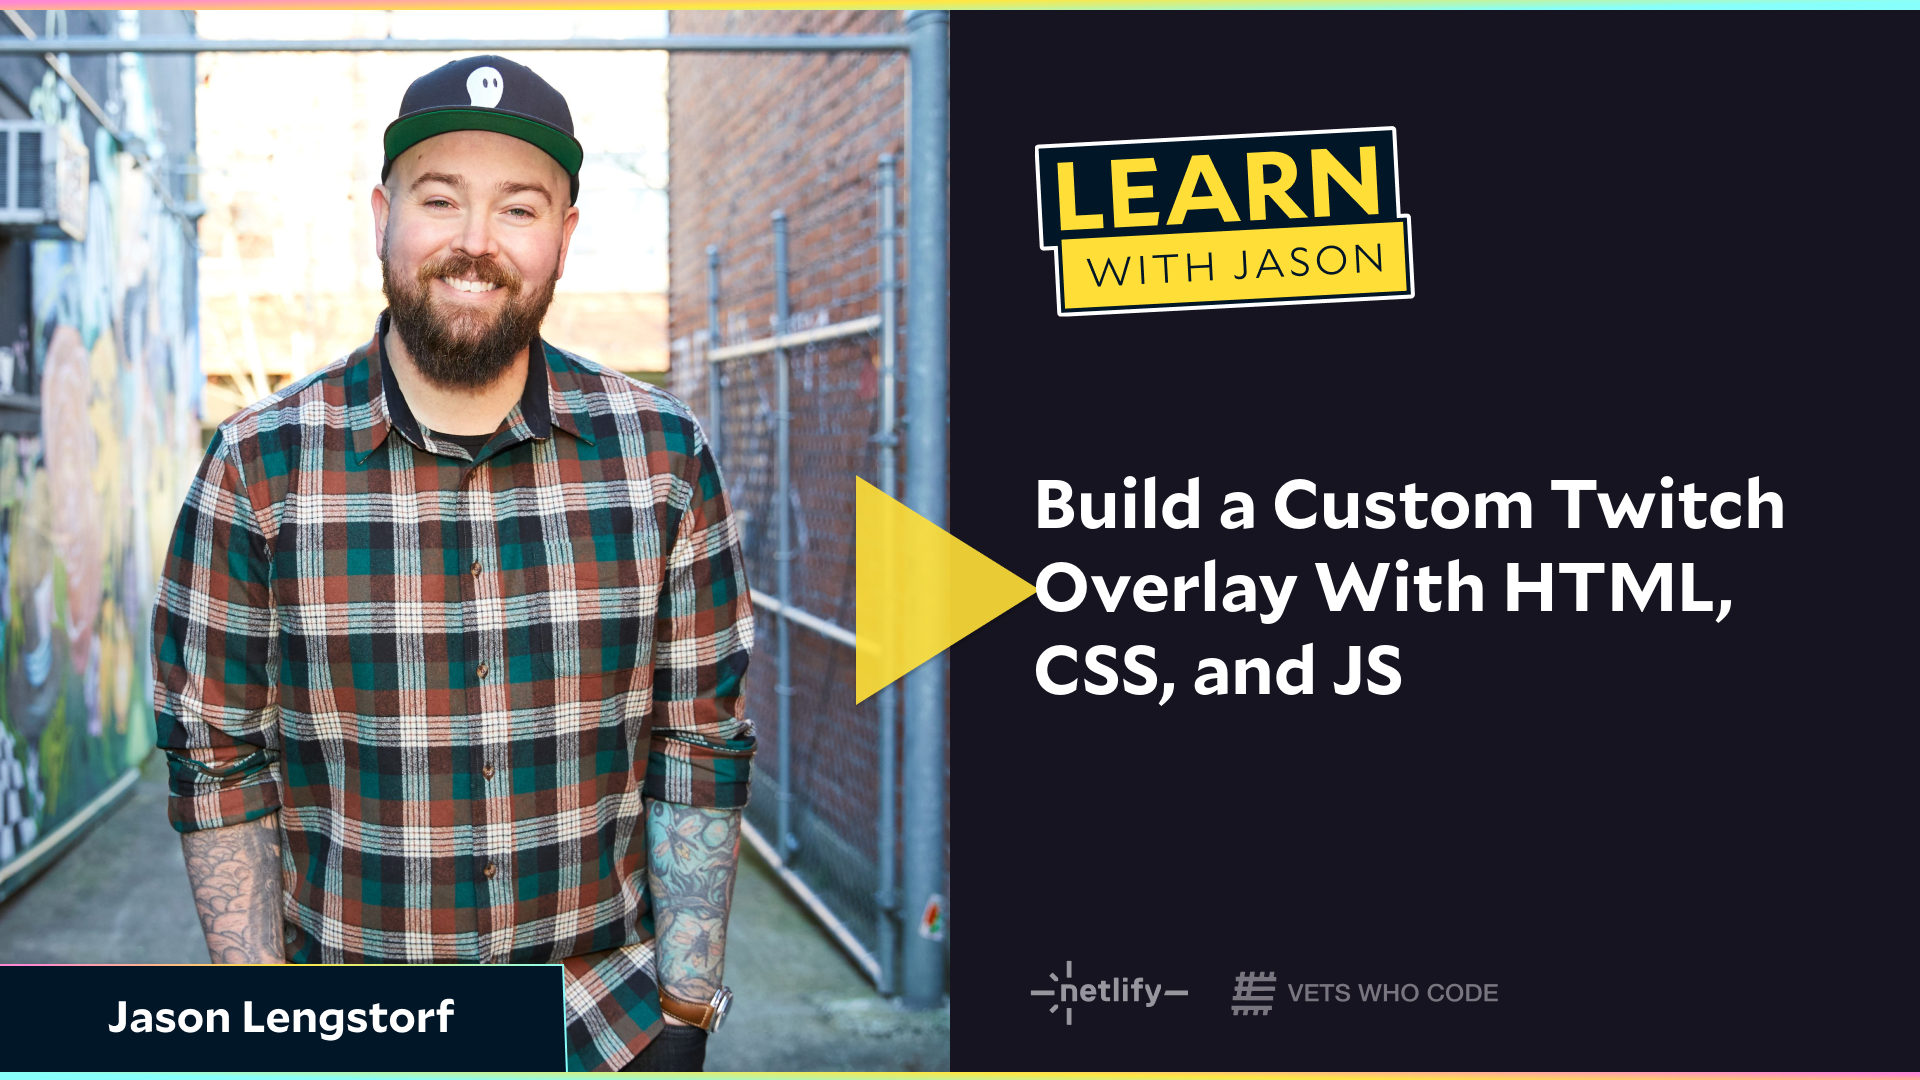 Build a Custom Twitch Overlay With HTML, CSS, and JS (with Jason Lengstorf)